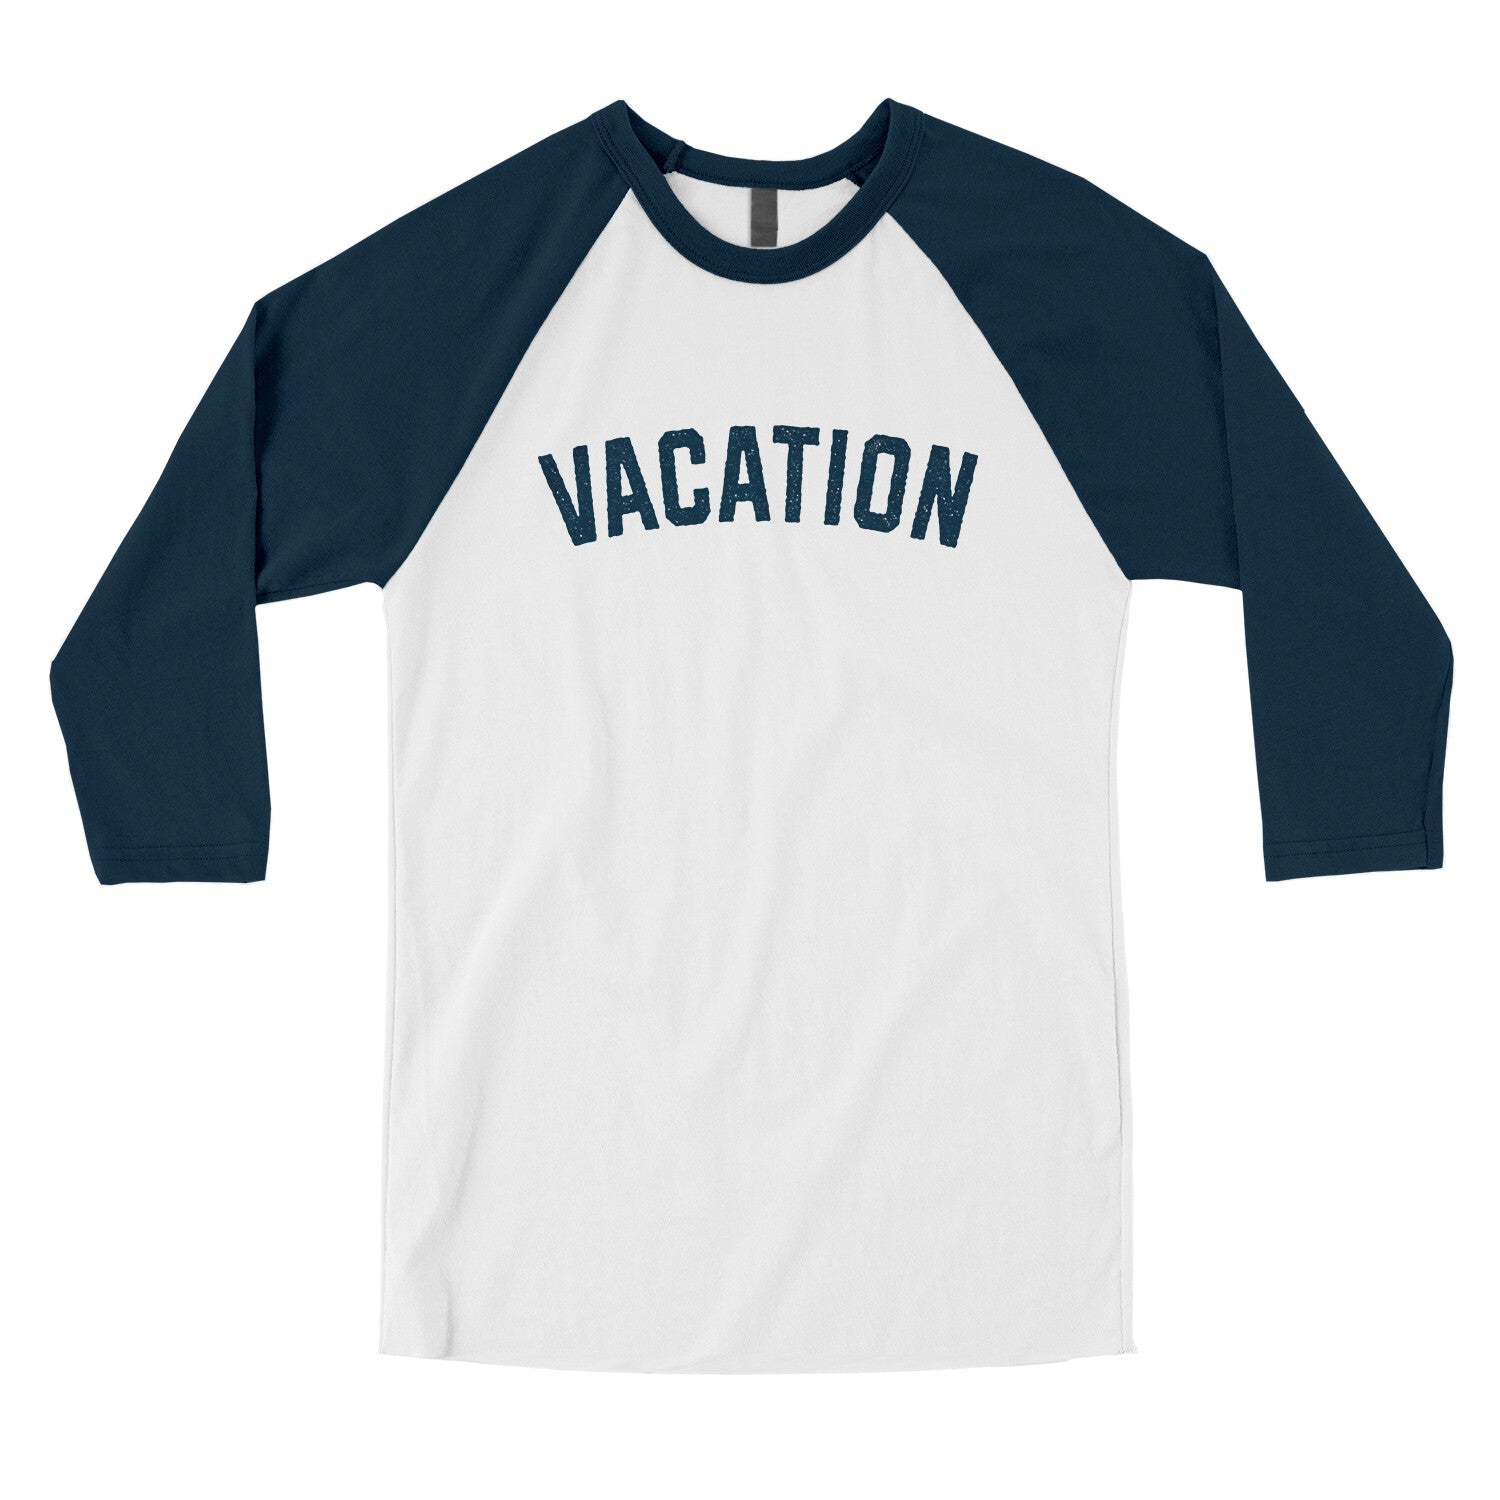 Vacation in White with Navy Color